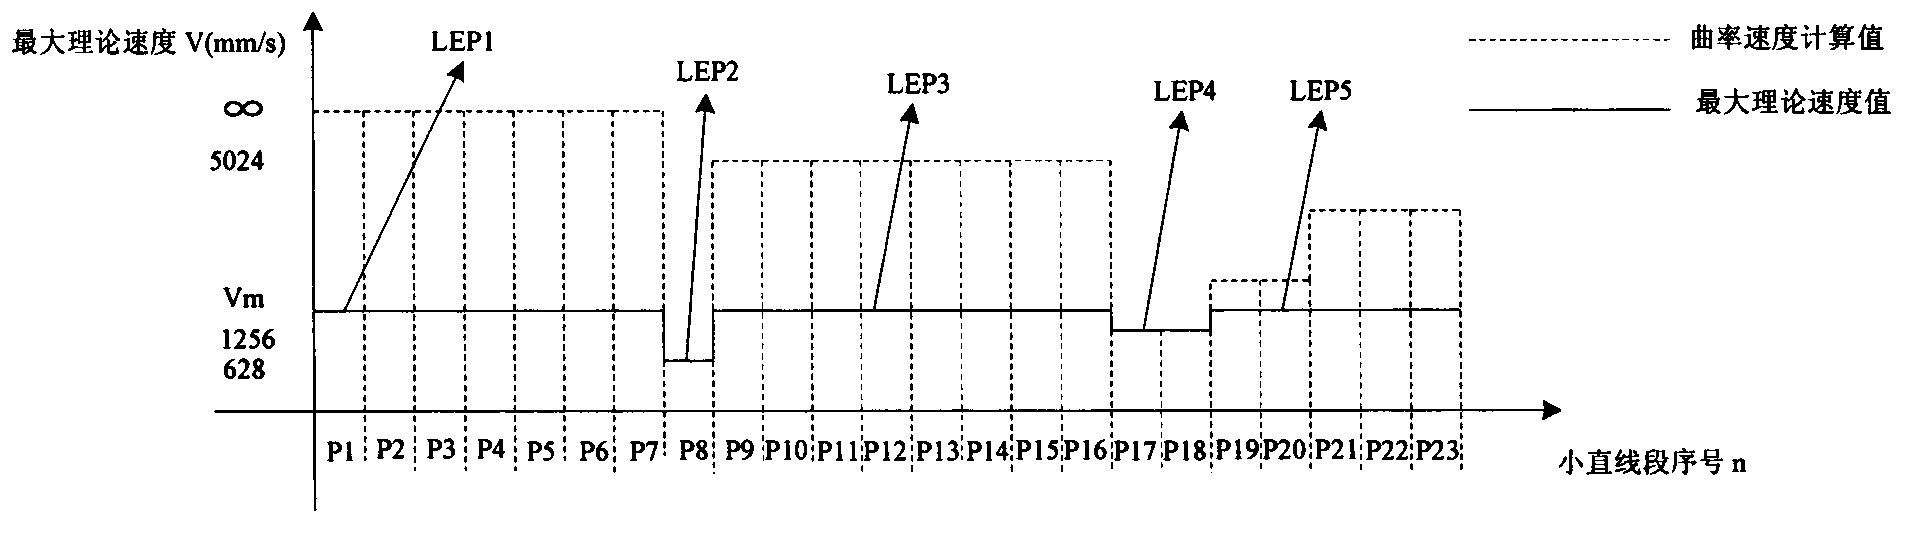 Speed control method for numerical control system in consideration of small line segment and connection point speed